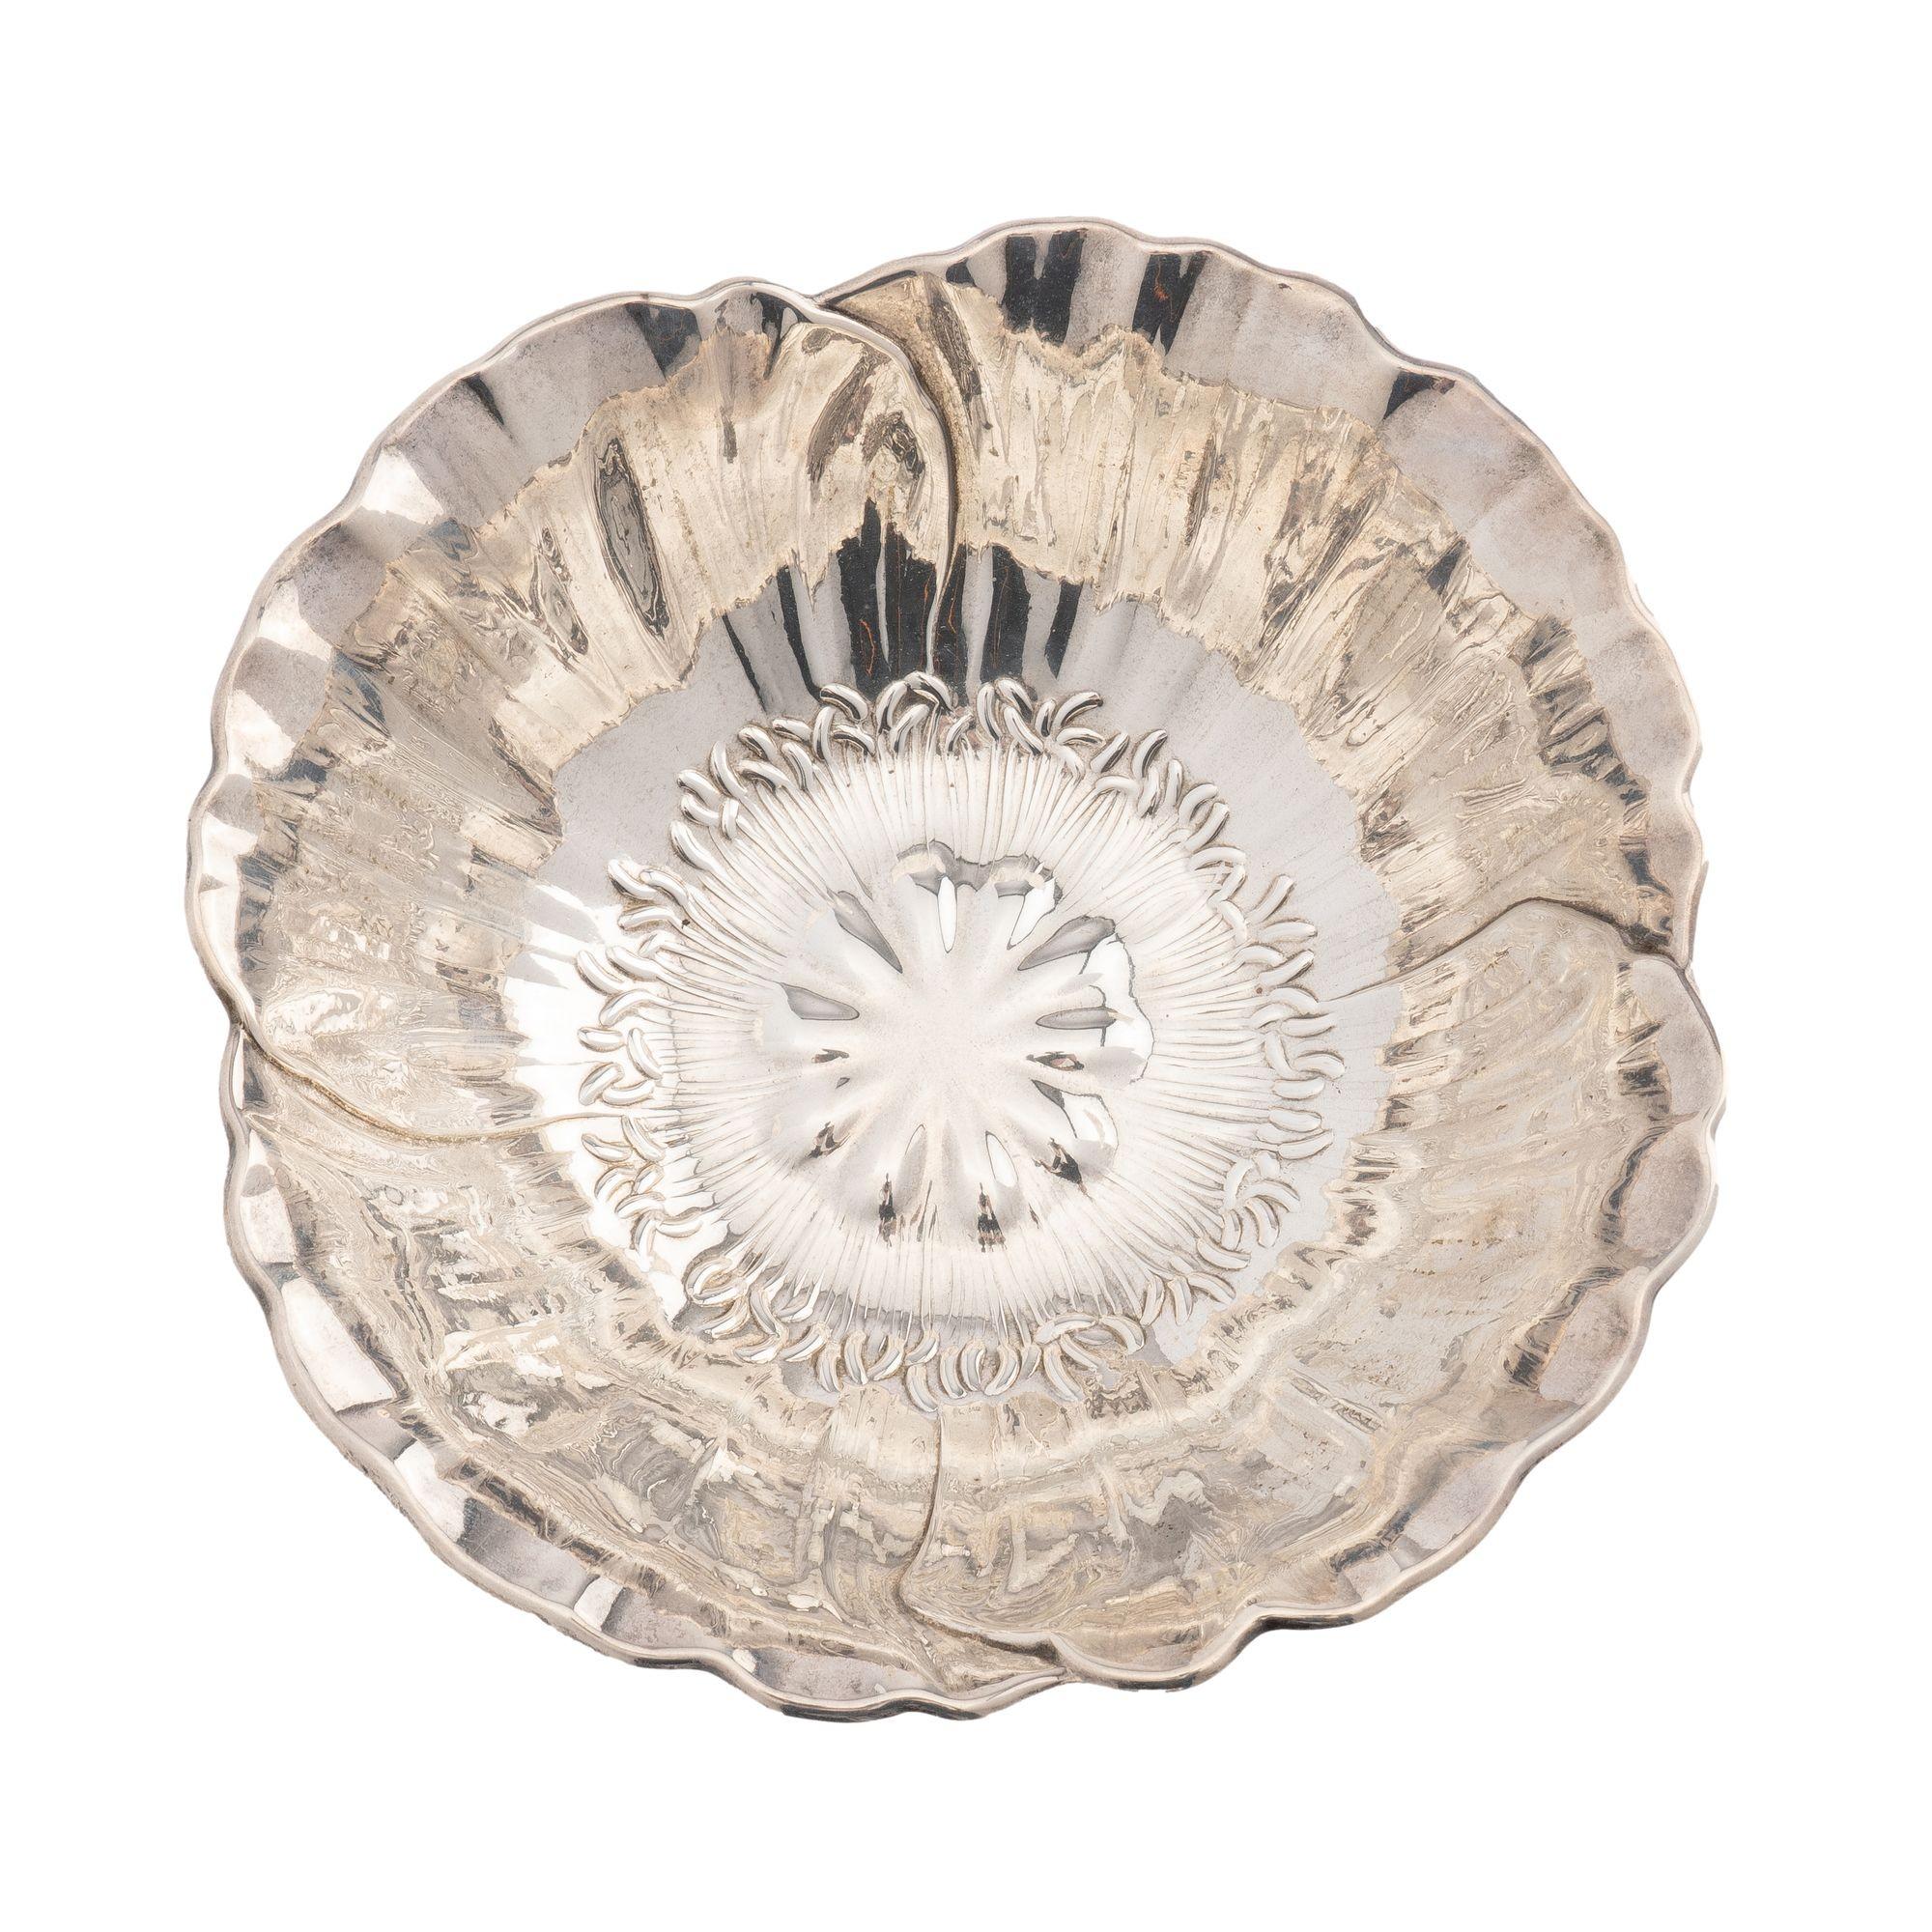 Aesthetic Movement Hand-Hammered Sterling Silver Bowl by Meriden Britannia Co '1893' For Sale